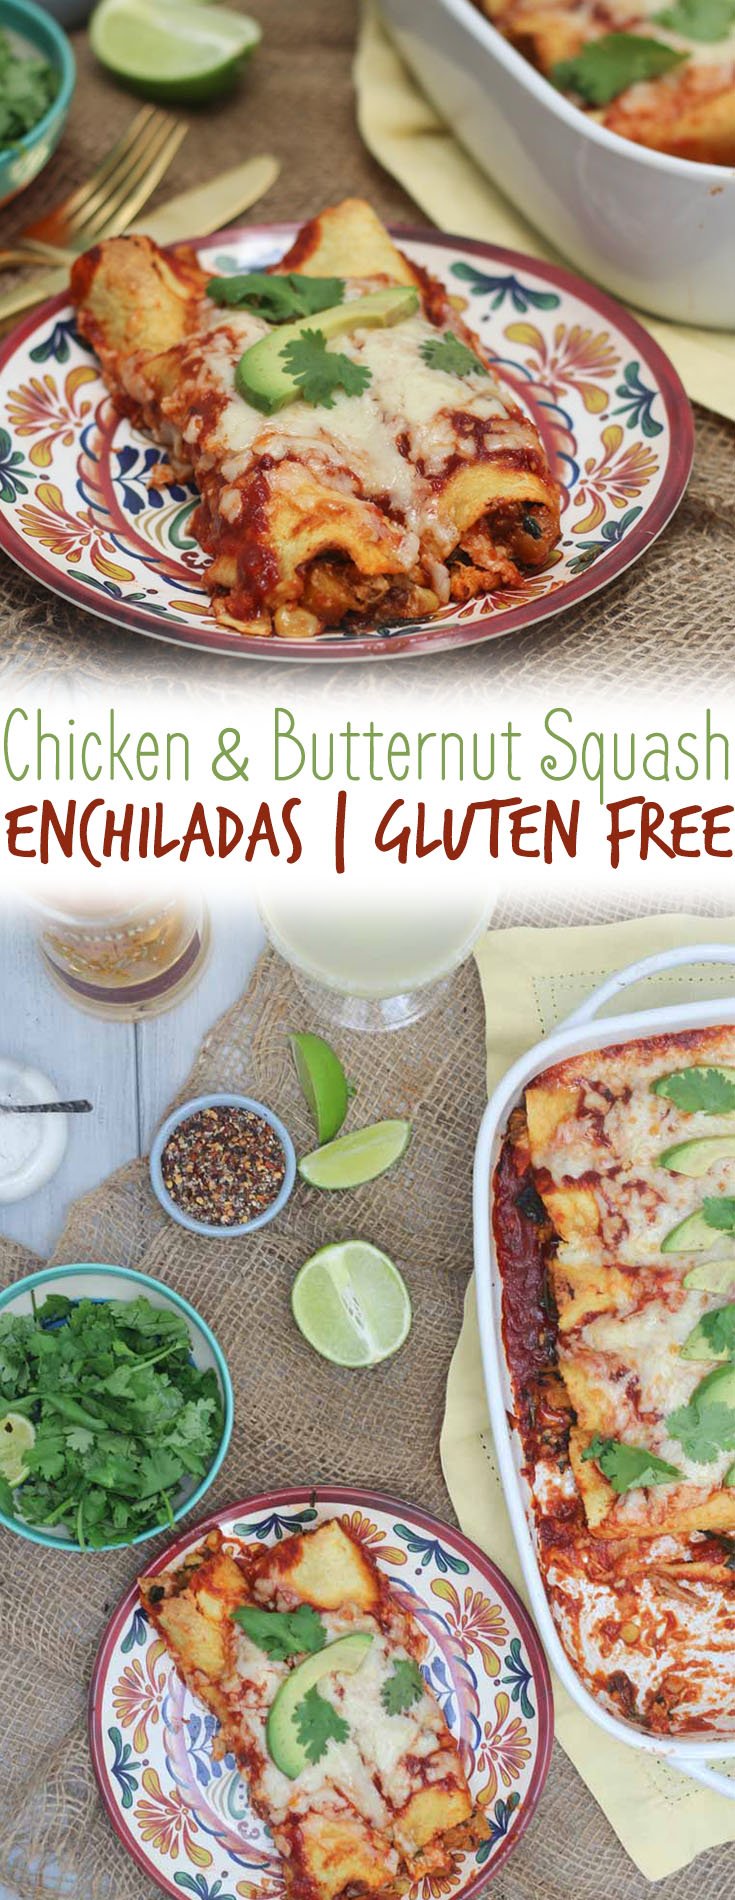 A pinterest image of enchiladas in a baking dish and in a plate with the text overlay \"Chicken & Butternut Squash Enchiladas | Gluten Free.\"